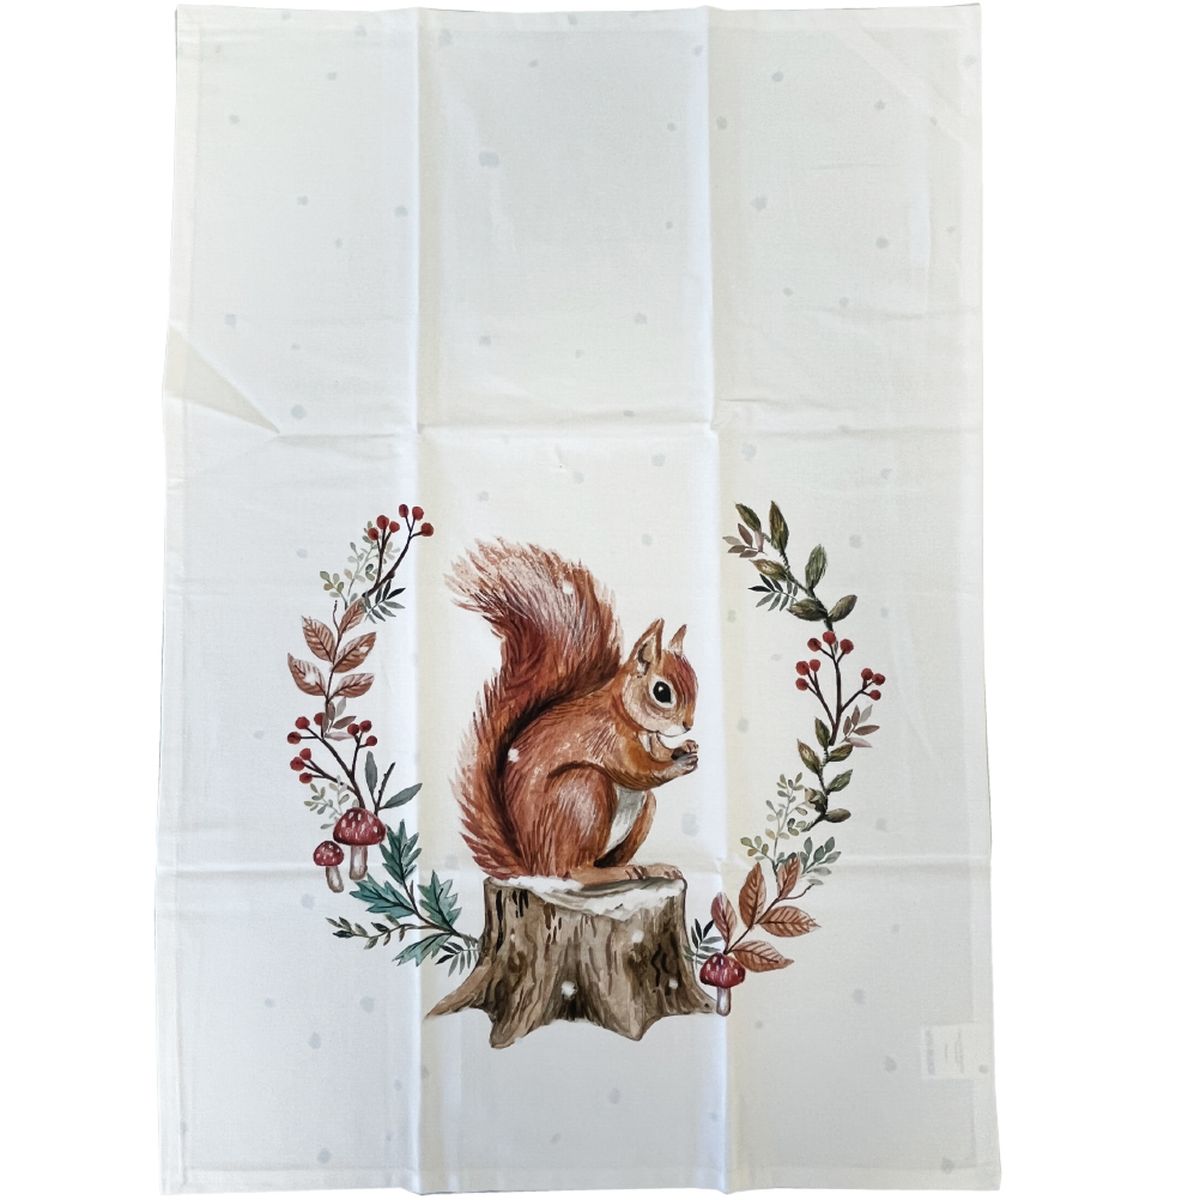 Kitchen Towel Storing For Winter 50 x 70 cm